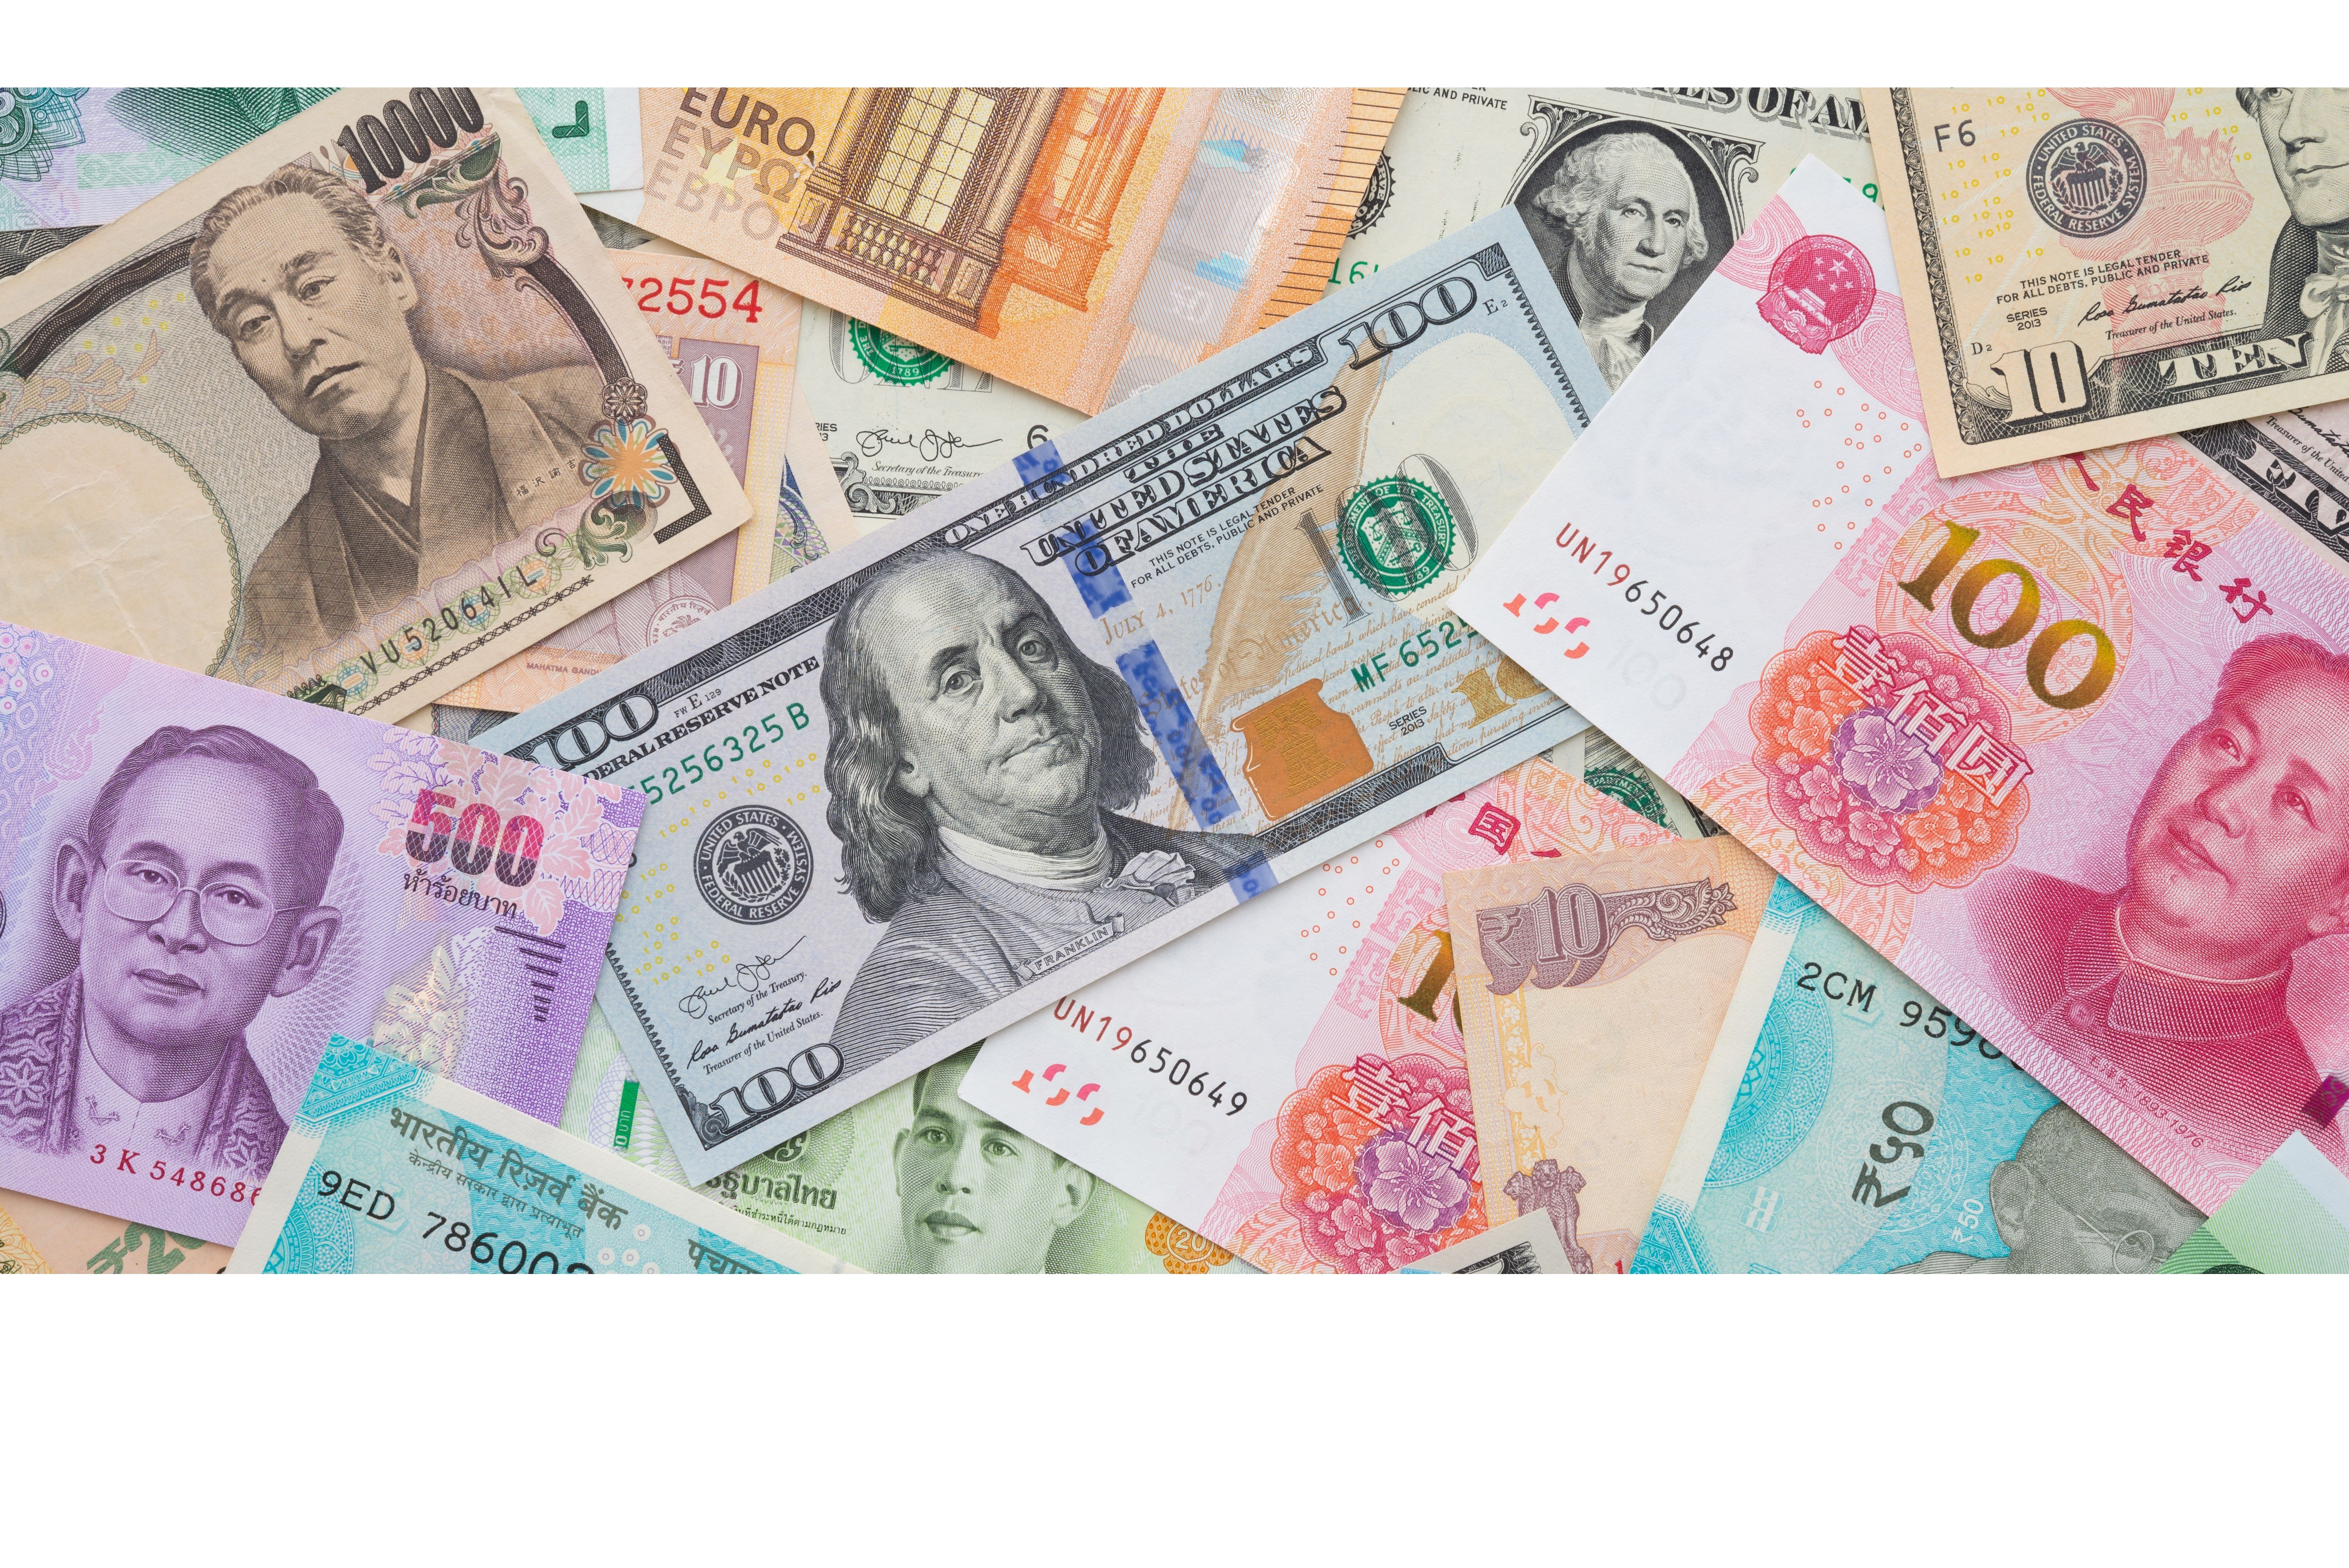 Flat lay or top view of world international banknotes vary countries background. US Dollar, Chinese yuan, Japanese yen, Euro, Indian rupee, Thai baht. Concept of Forex or global financial economic.